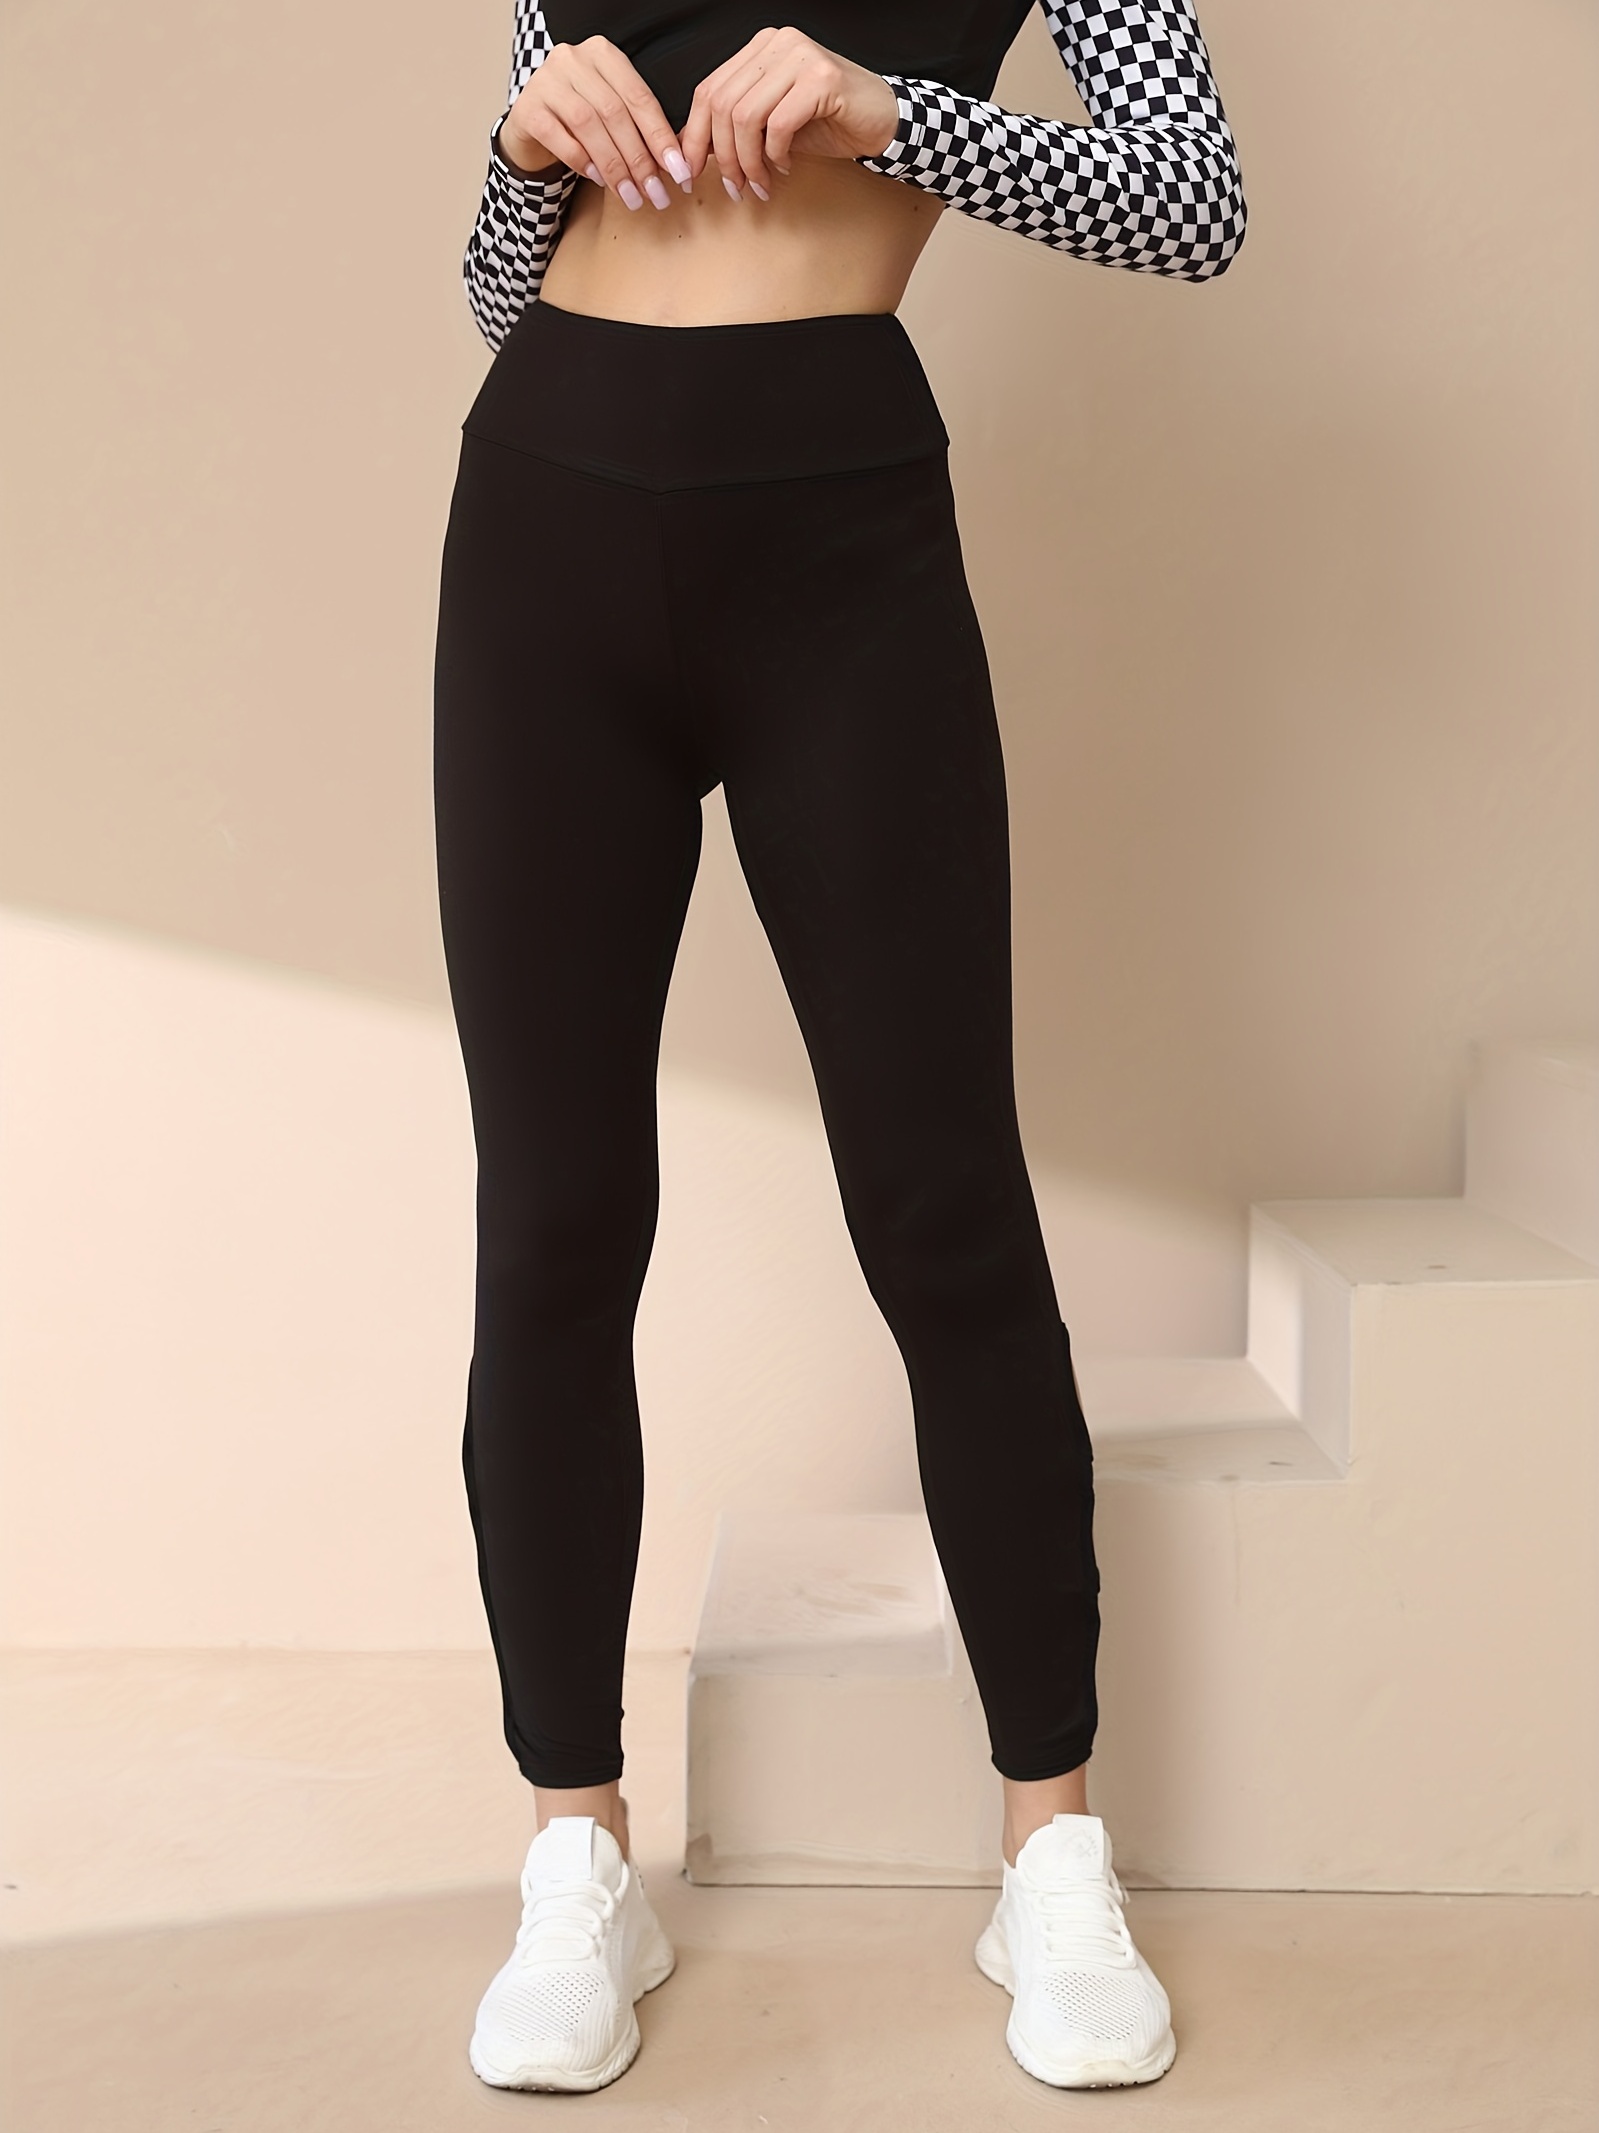 Womens High Waisted Hollow Out Cross Waist Womens Cropped Yoga Pants With  Back Pocket For Gym, Yoga, And Workout From Noellolitary, $15.9